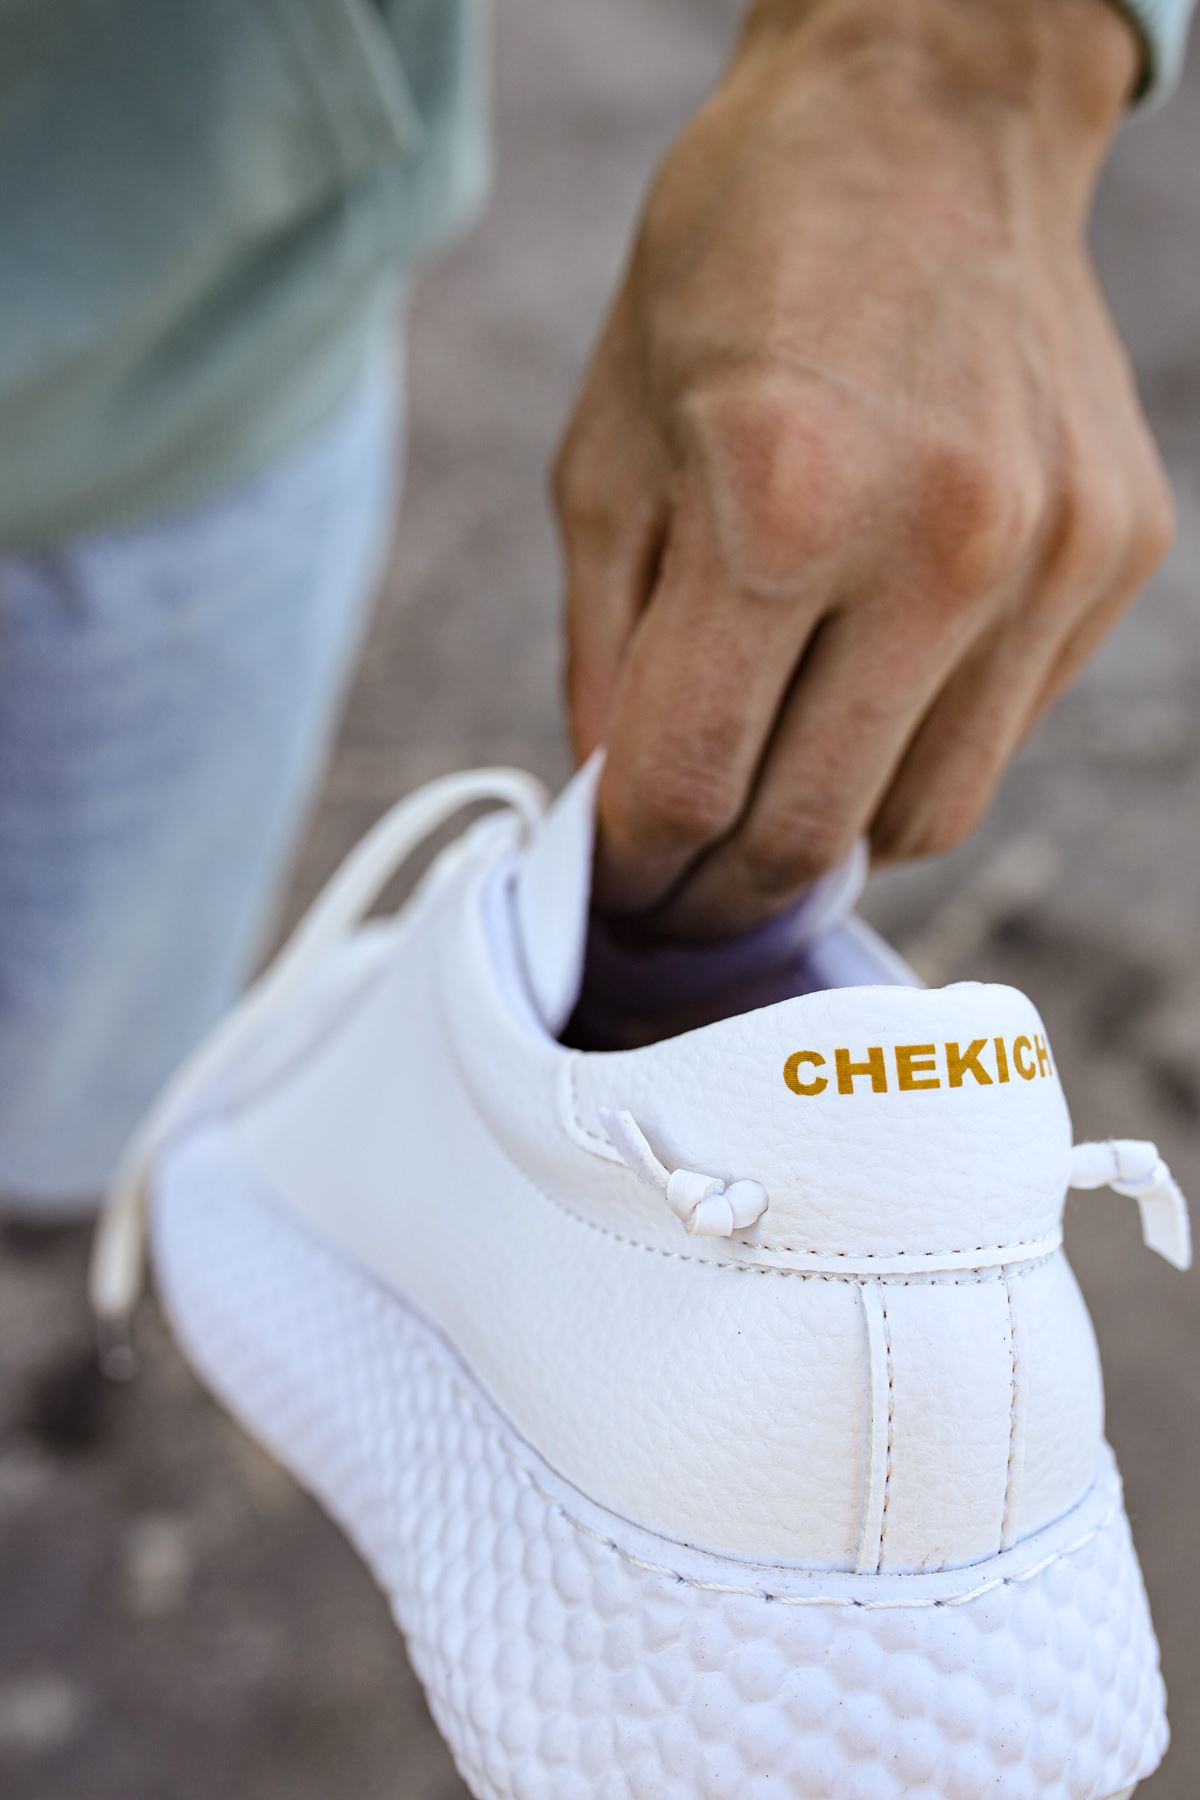 Chekich Men's & Women's Sneakers White Artificial Leather Lace Up Summer Casual Comfortable Flexible Fashion Unisex Wedding Orthopedic Walking Sport Shoes Lightweight Running Shoes Breathable Bubbles Sole Sewing CH107